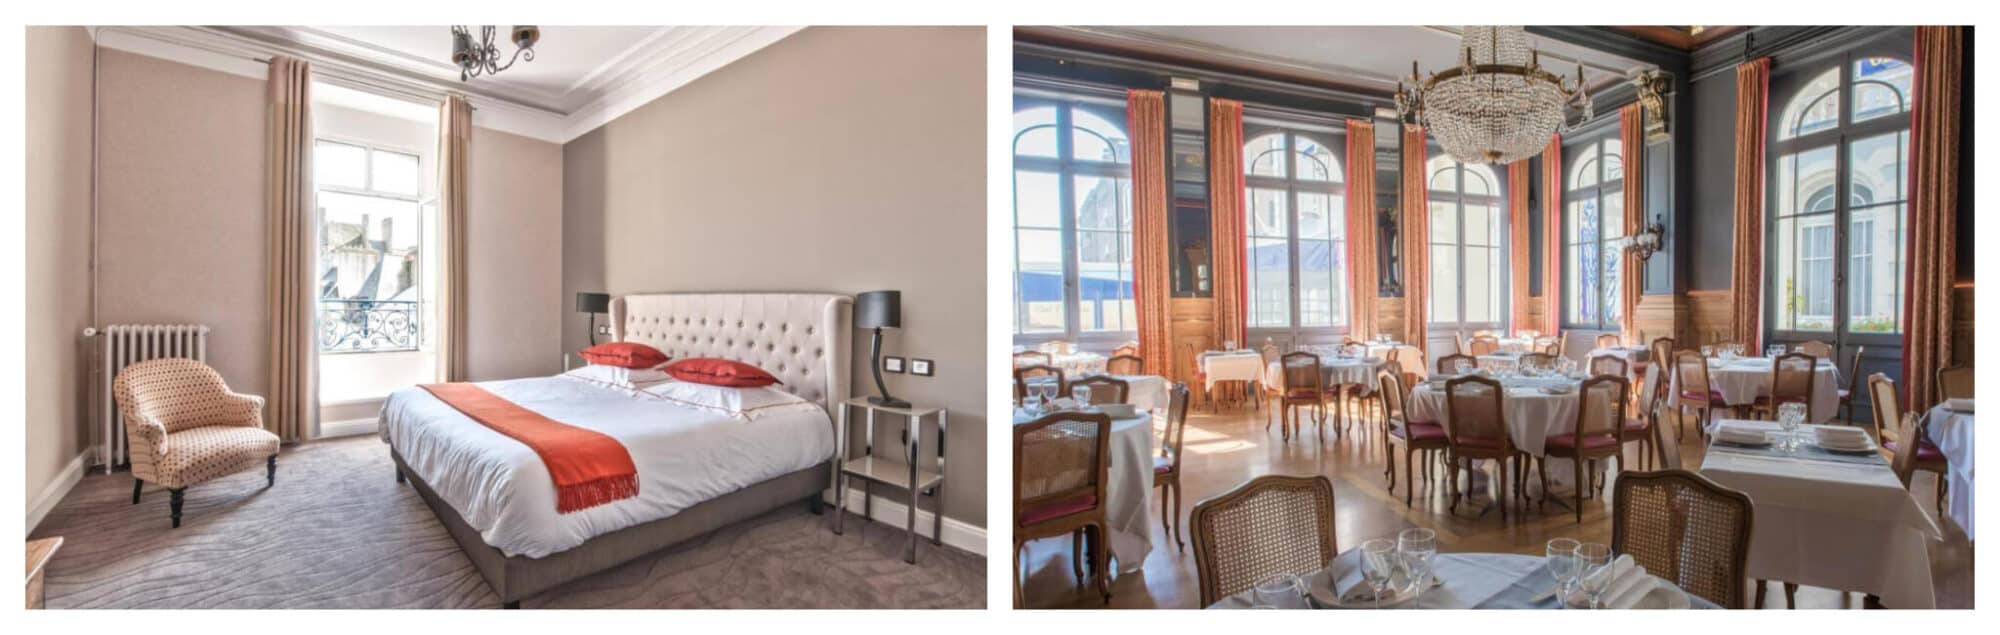 Left: A large beige bedroom in Hotel de France et Chateaubriand, with a bed furnished with red pillows and cover; Right: Hotel de France et Chateaubriand's dining area filled with round tables and wooden chairs.